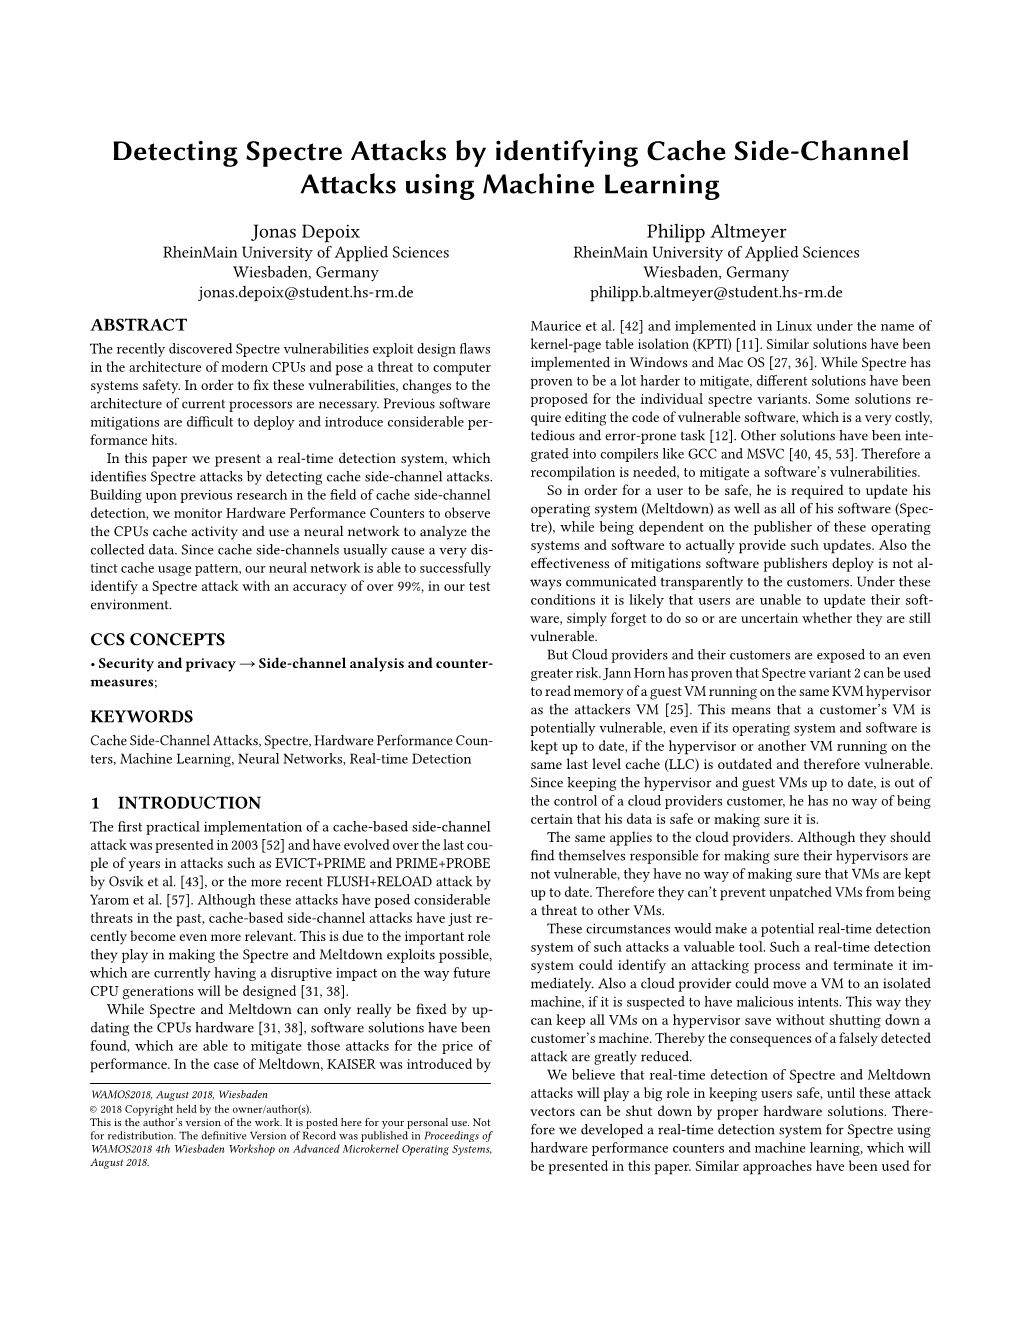 Detecting Spectre Attacks by Identifying Cache Side-Channel Attacks Using Machine Learning